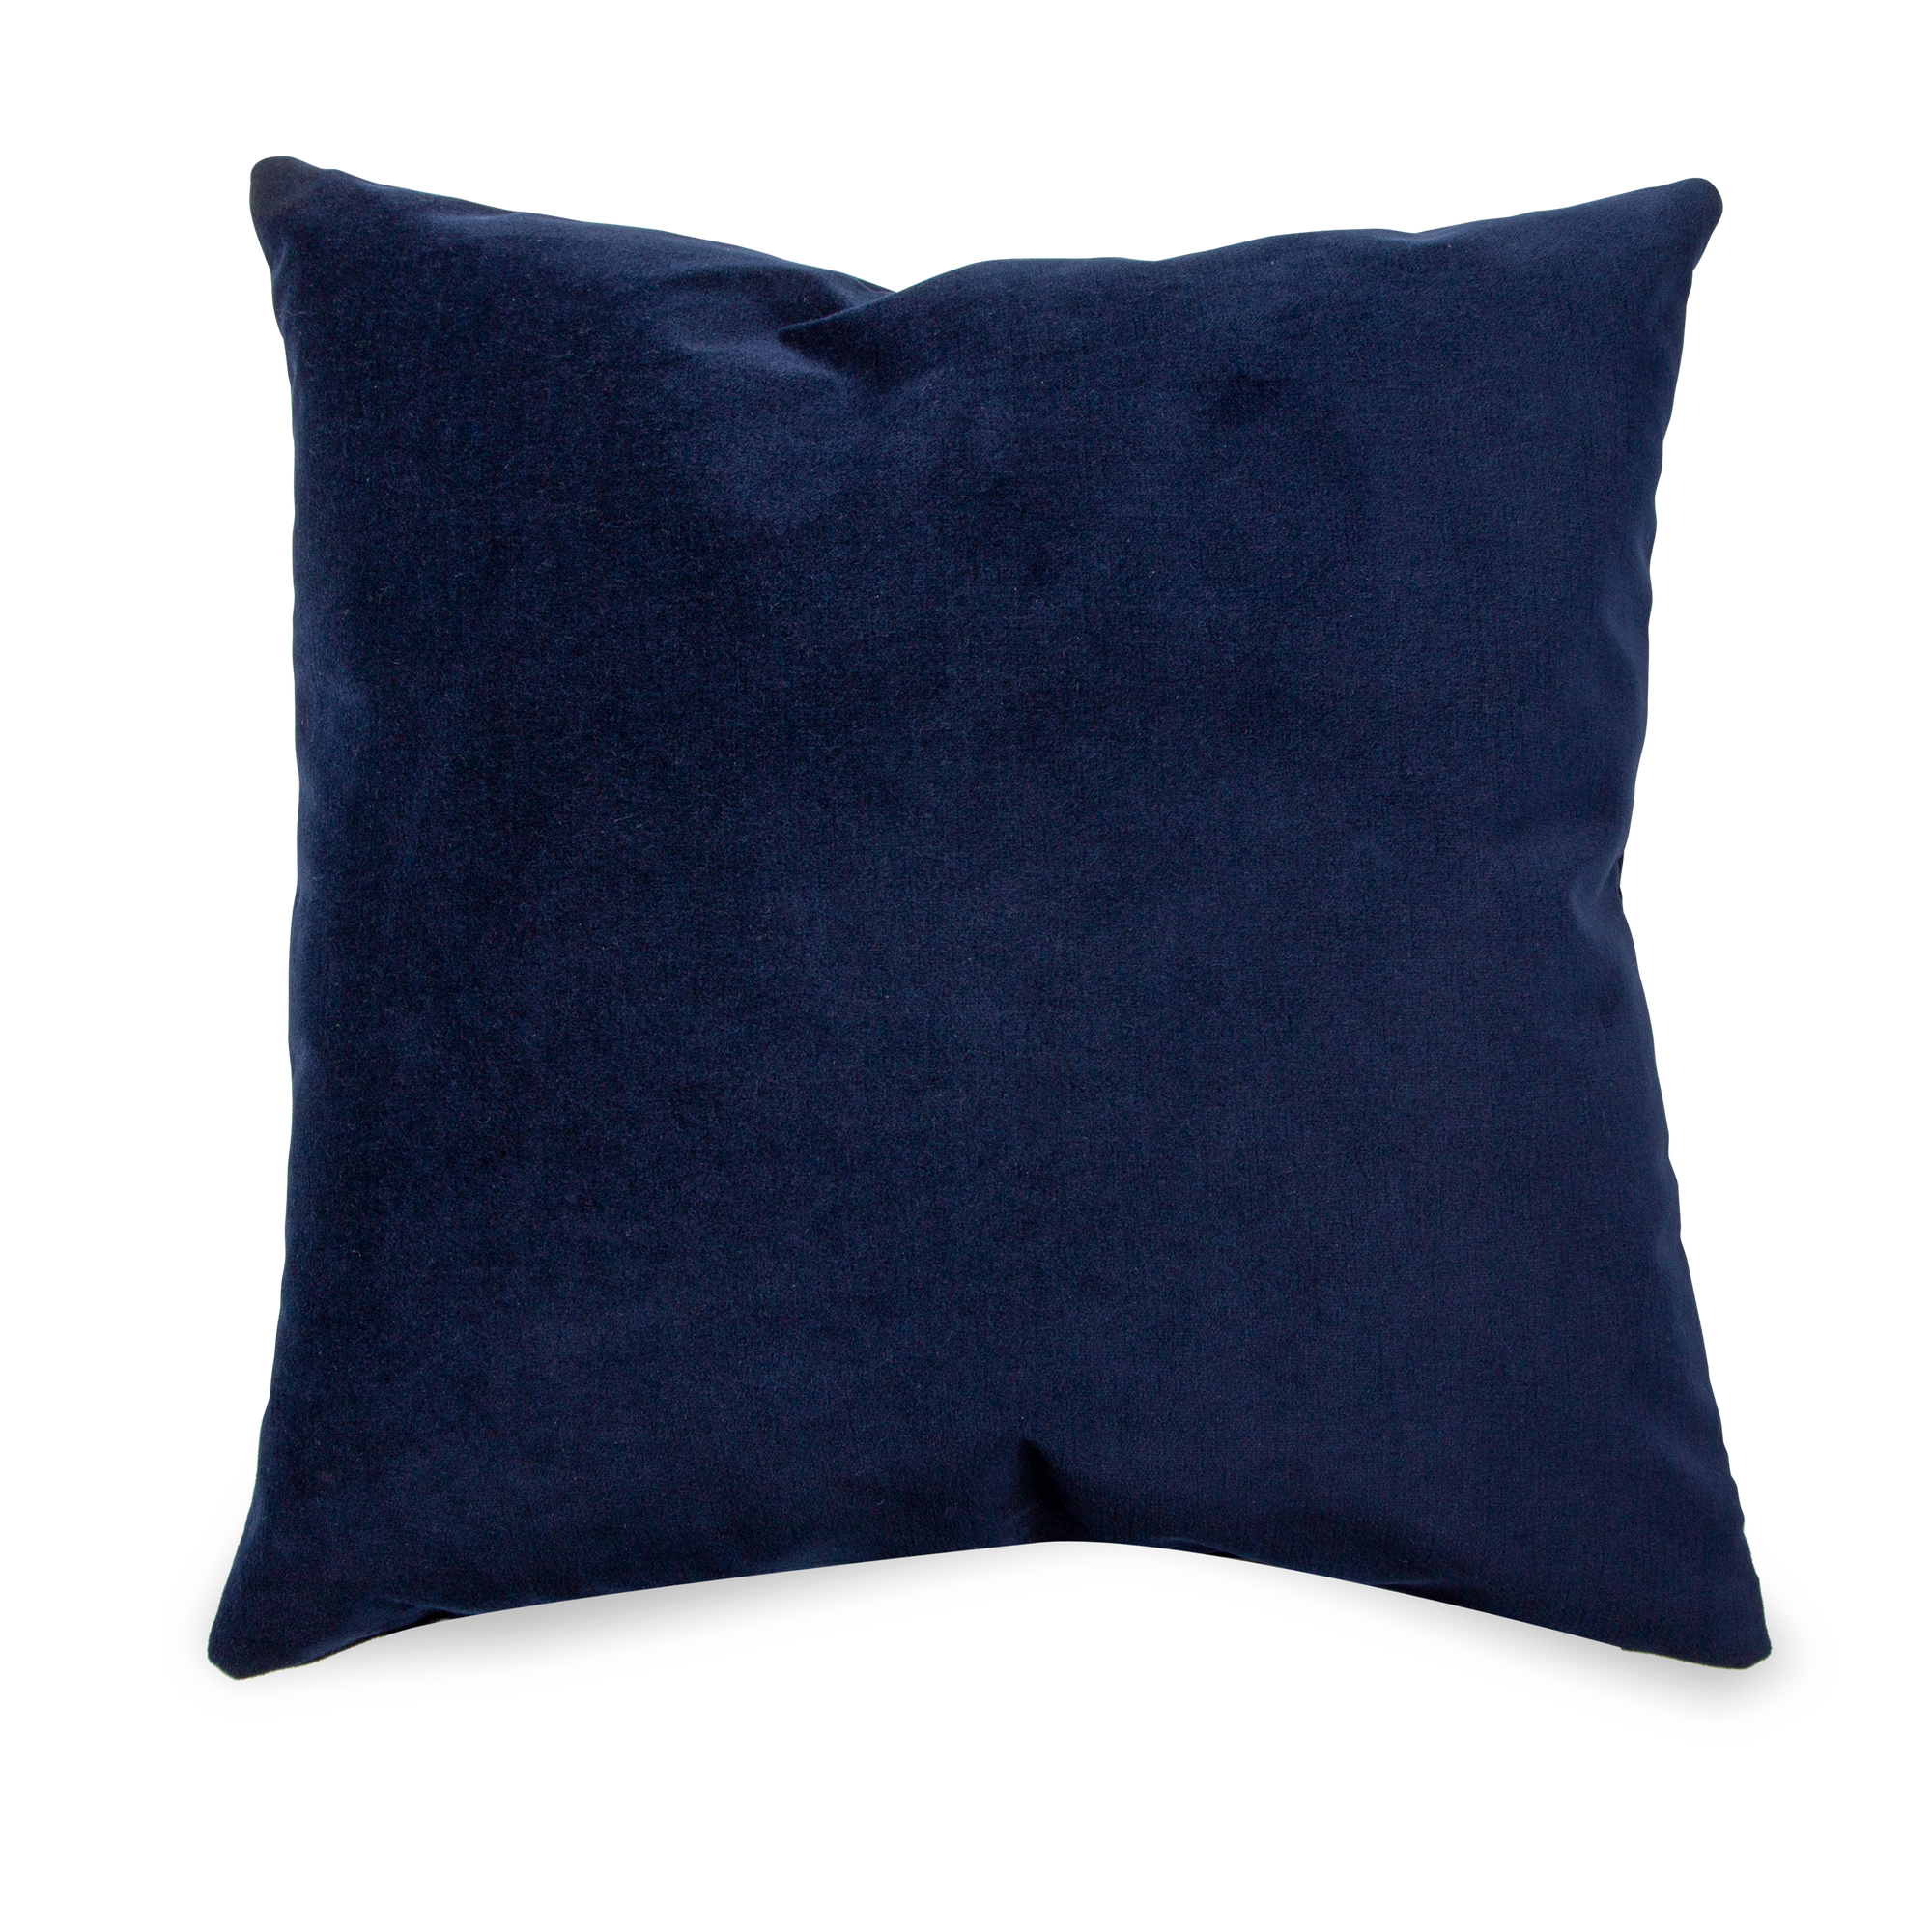 Defined by its textural appeal, the Solid Velvet Pillow is recognized for its luxurious velvet texture and its pleasant solid colour.